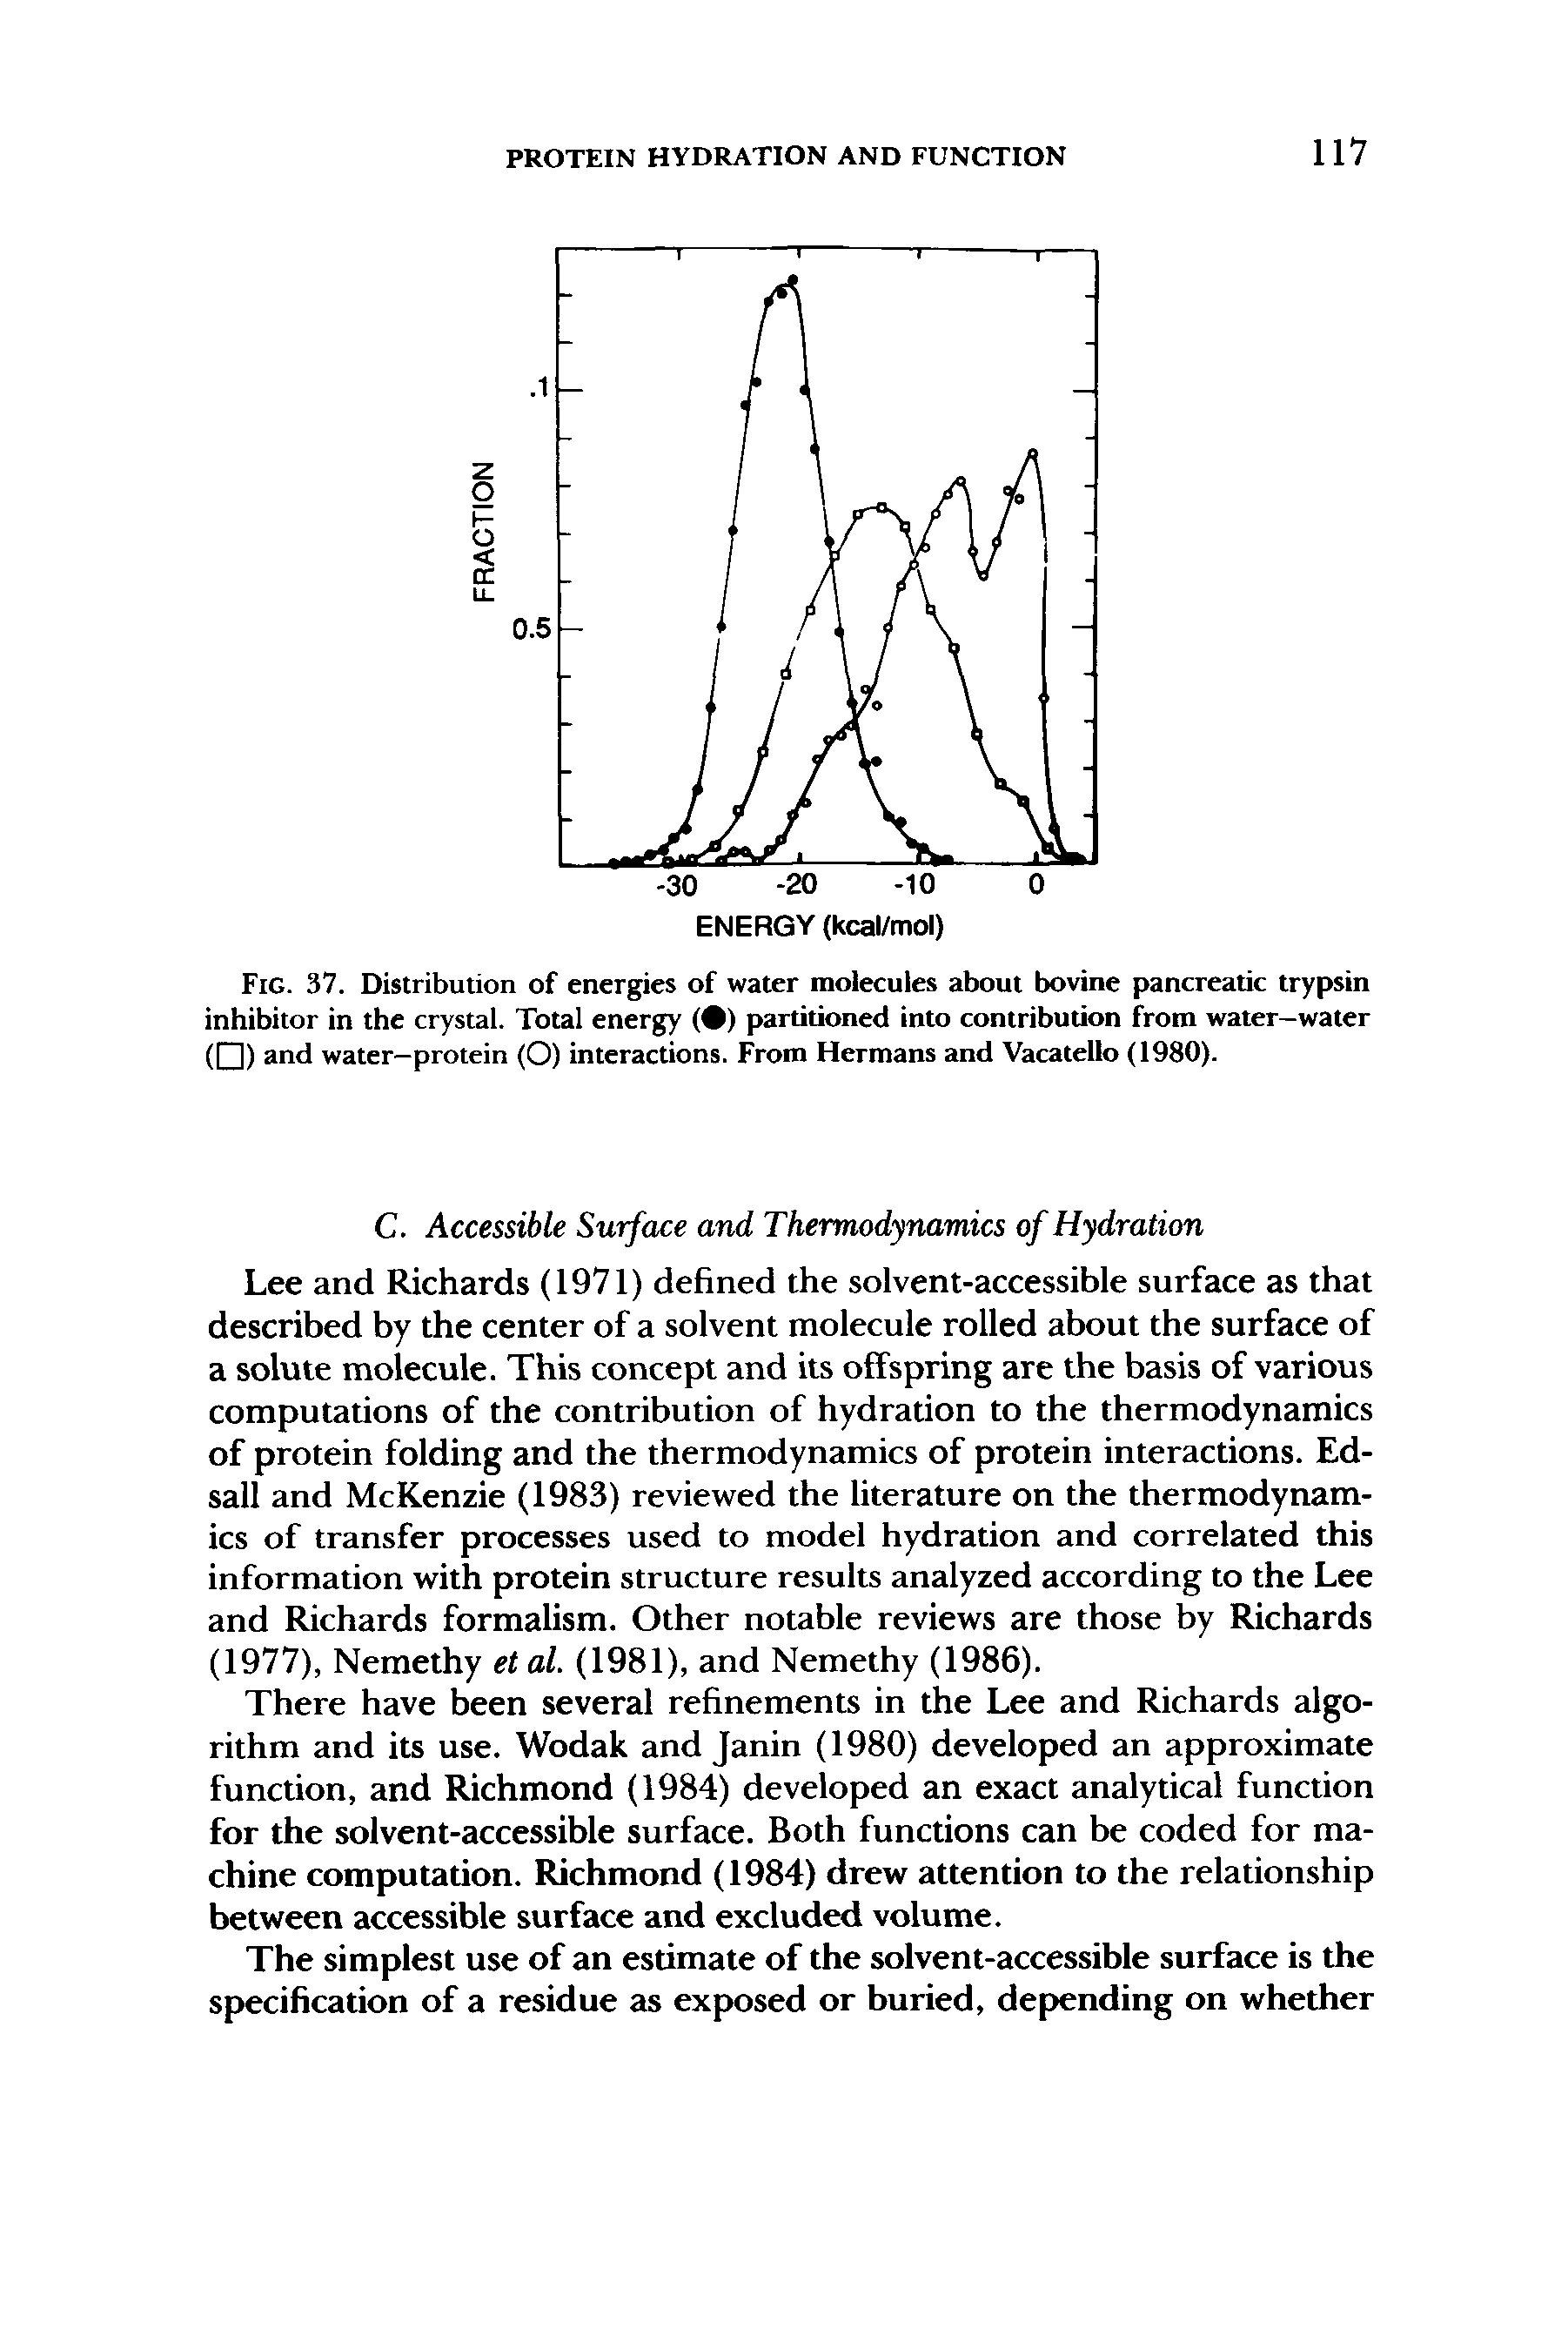 Fig. 37. Distribution of energies of water molecules about bovine pancreatic trypsin inhibitor in the crystal. Total energy ( ) partitioned into contribution from water-water (D) water-protein (O) interactions. From Hermans and Vacatello (1980).